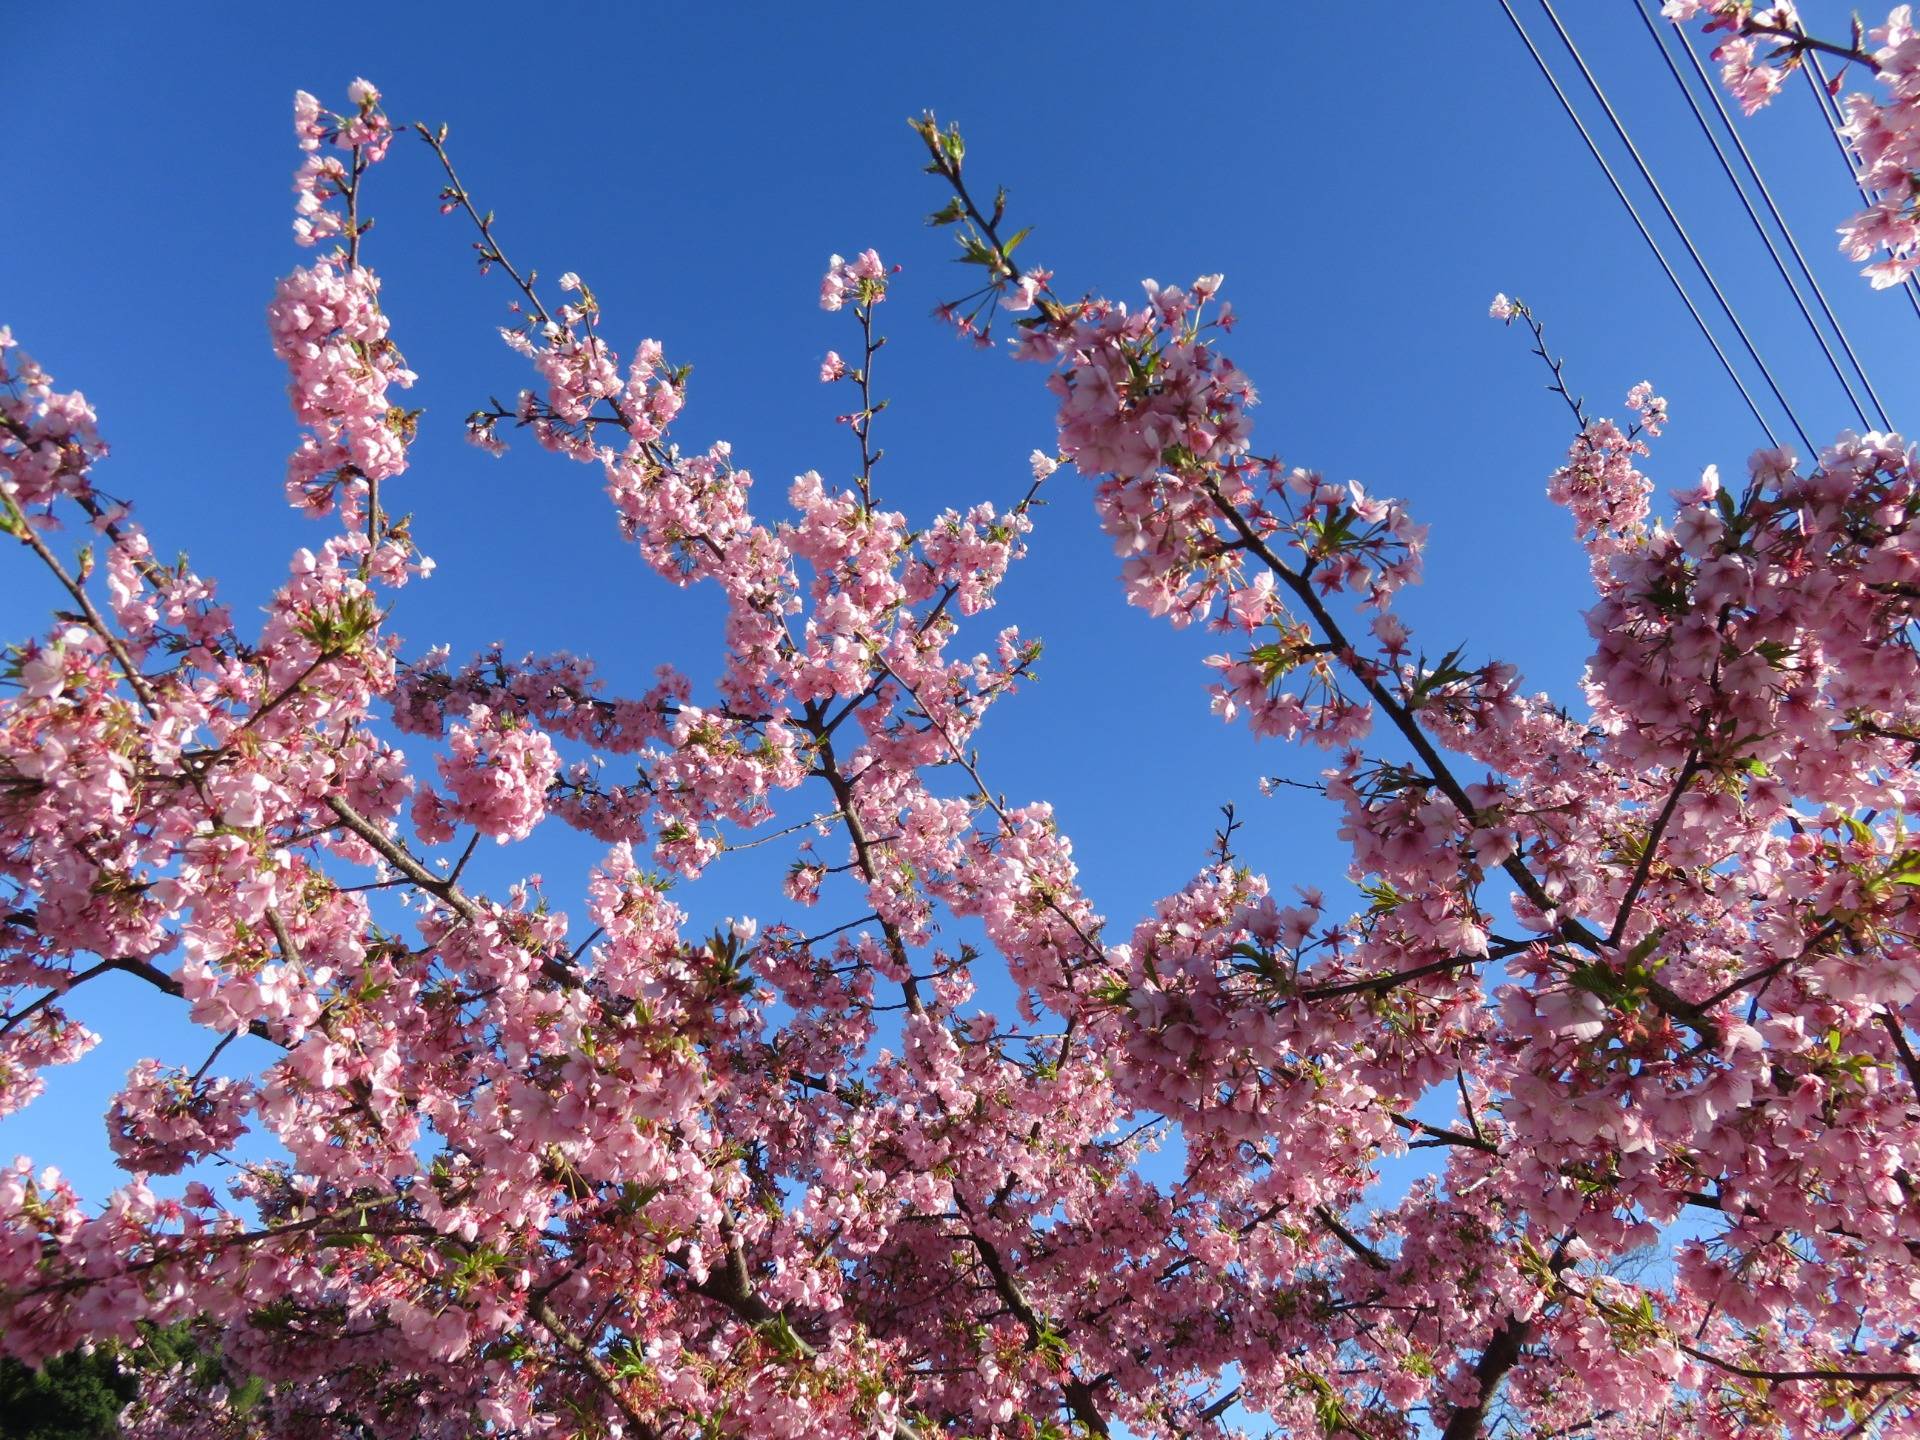 Early Cherry Blossoms Festivals Cancelled due to Corona Virus.